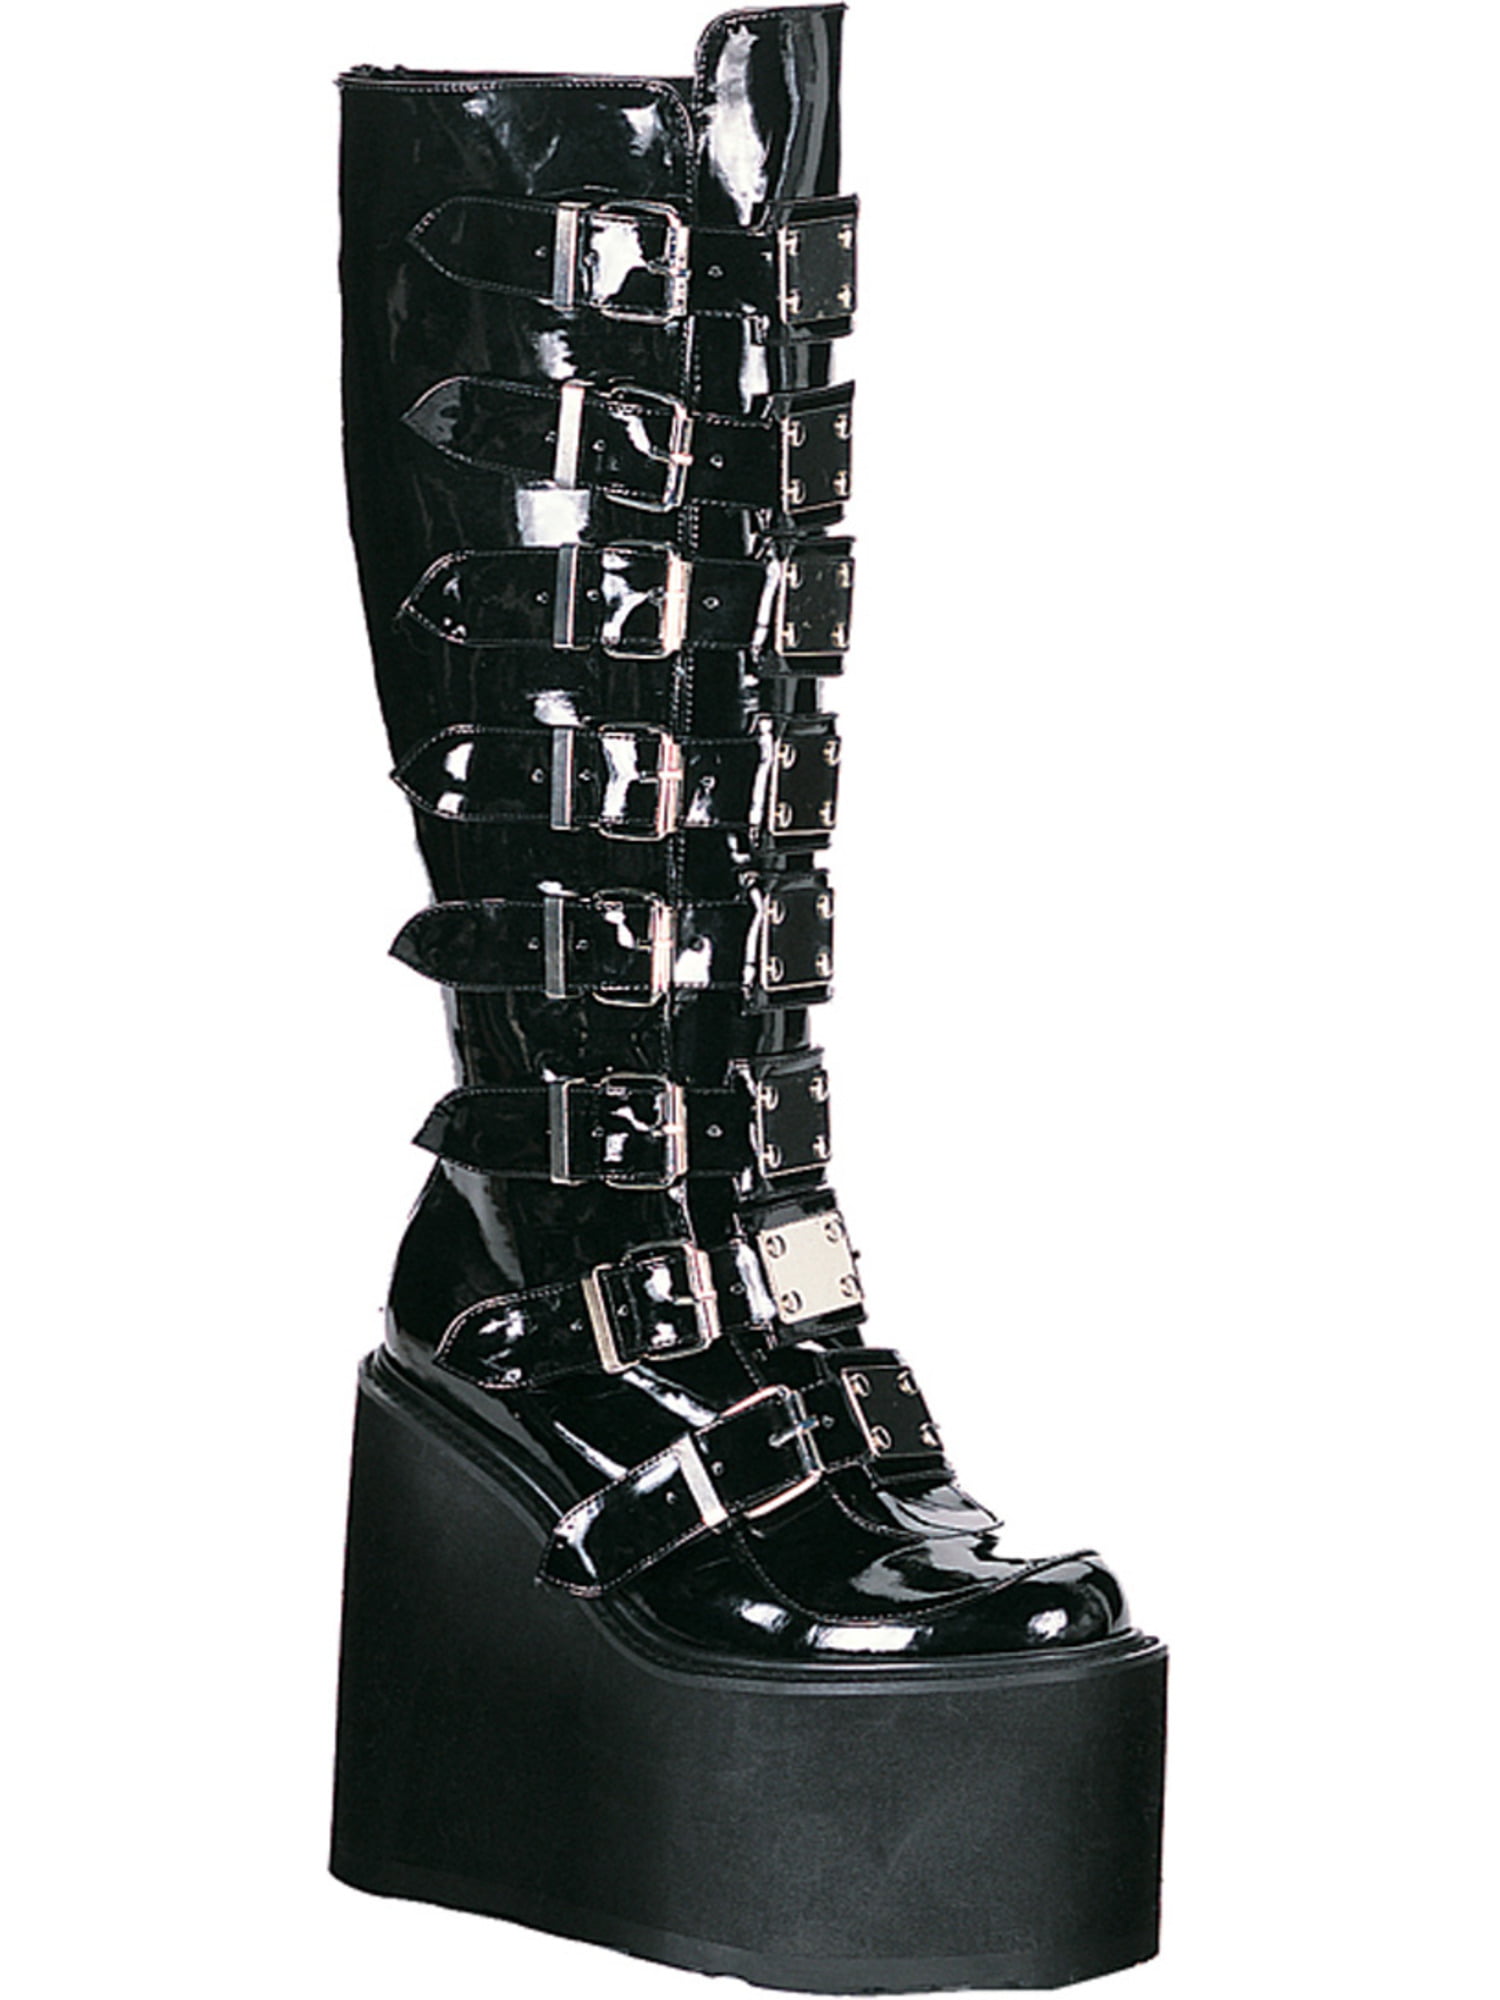 Demonia Black Patent Gothic Boots Metal Buckles Straps 5 12 Inch